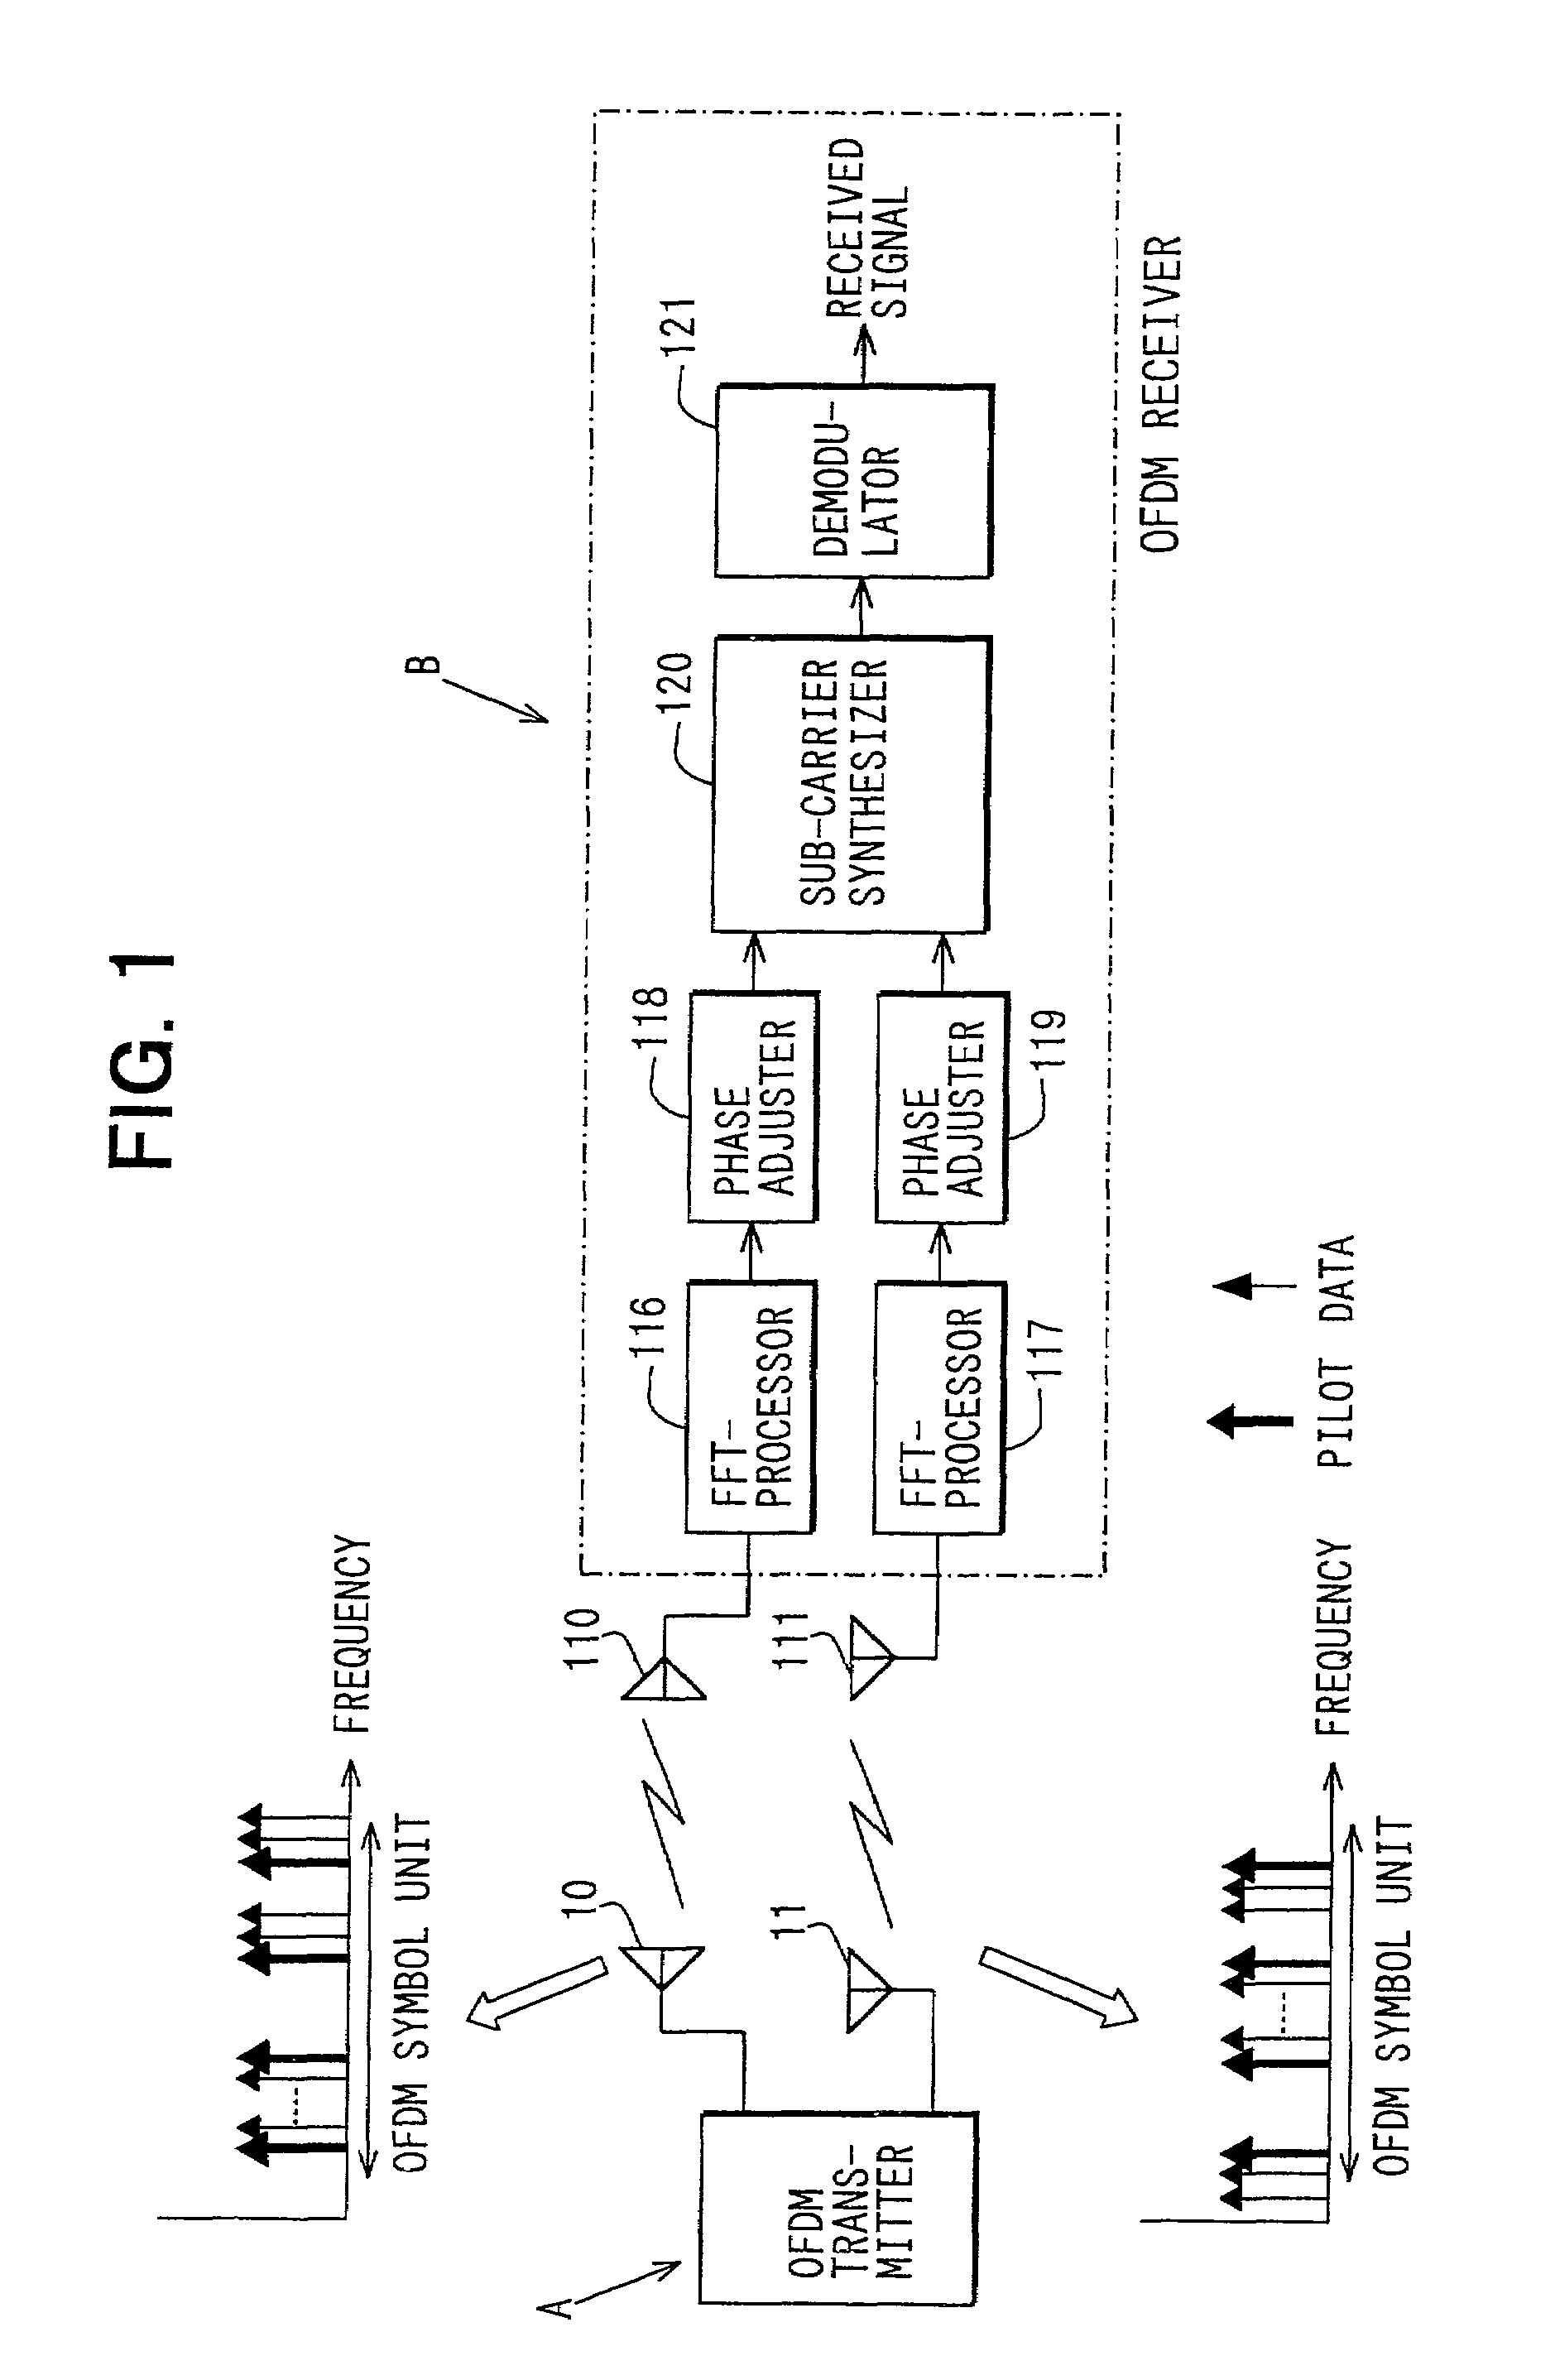 OFDM communication system and transmitter-receiver for use in the system